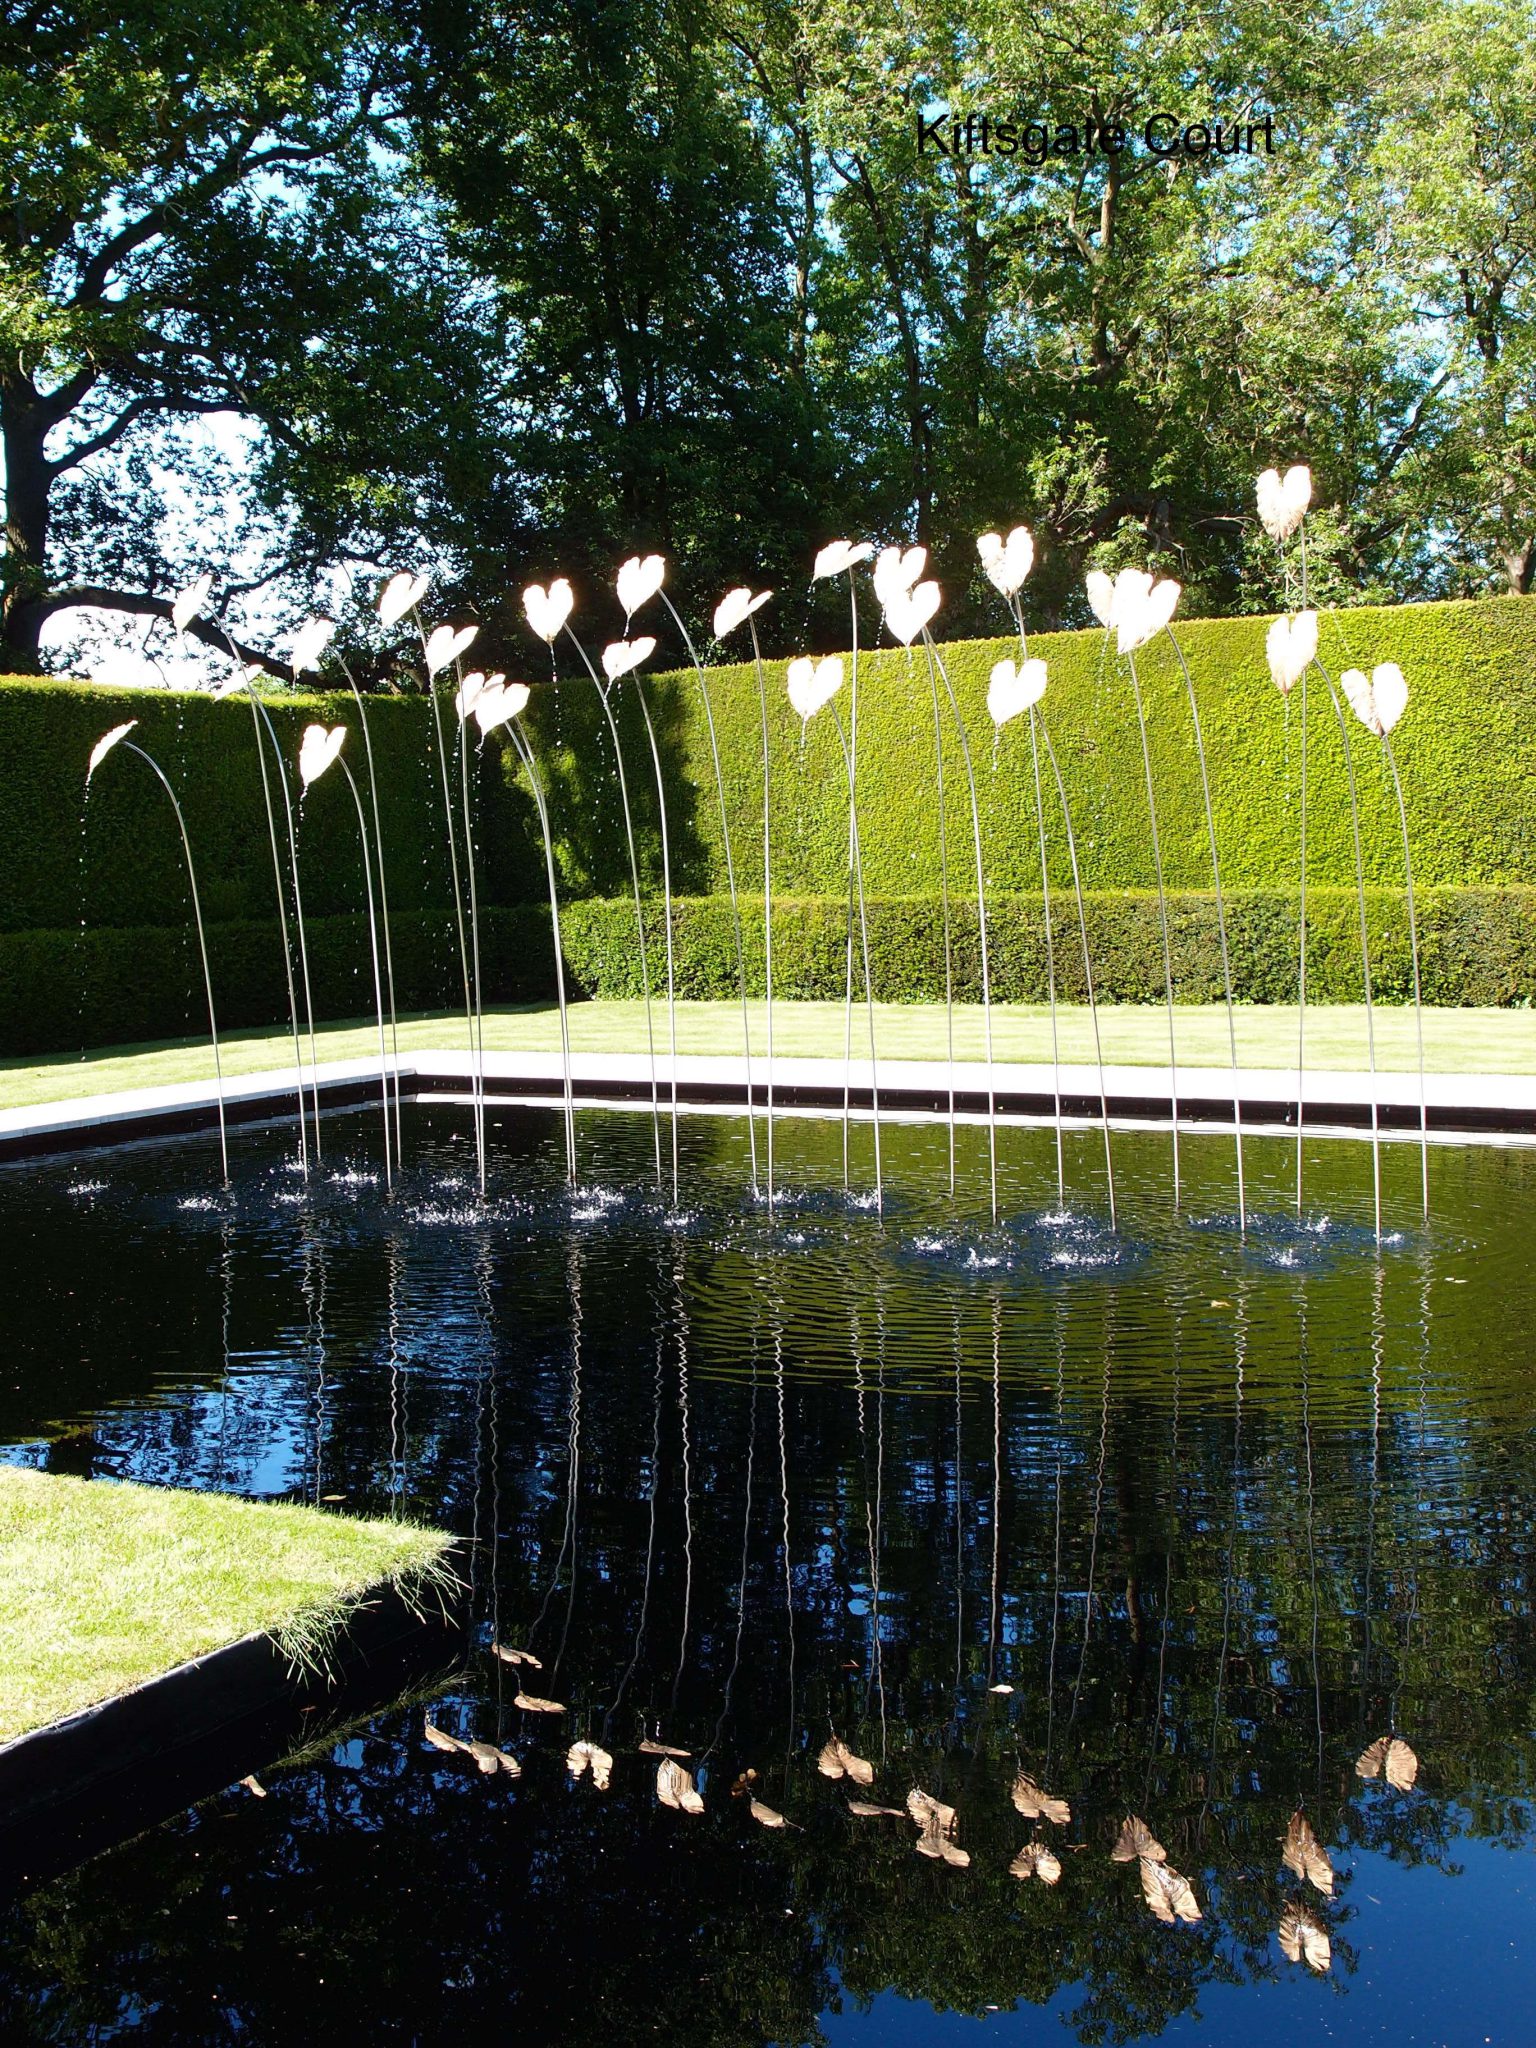 Sculptor Simon Allison designed 24 stainless steel stems that are topped with gilded bronze leaves molded from a philodendron. The stems sway gently in the wind and reflect well in the dark water. Every 5 minutes, water begins to stream from the tips of the leaves.